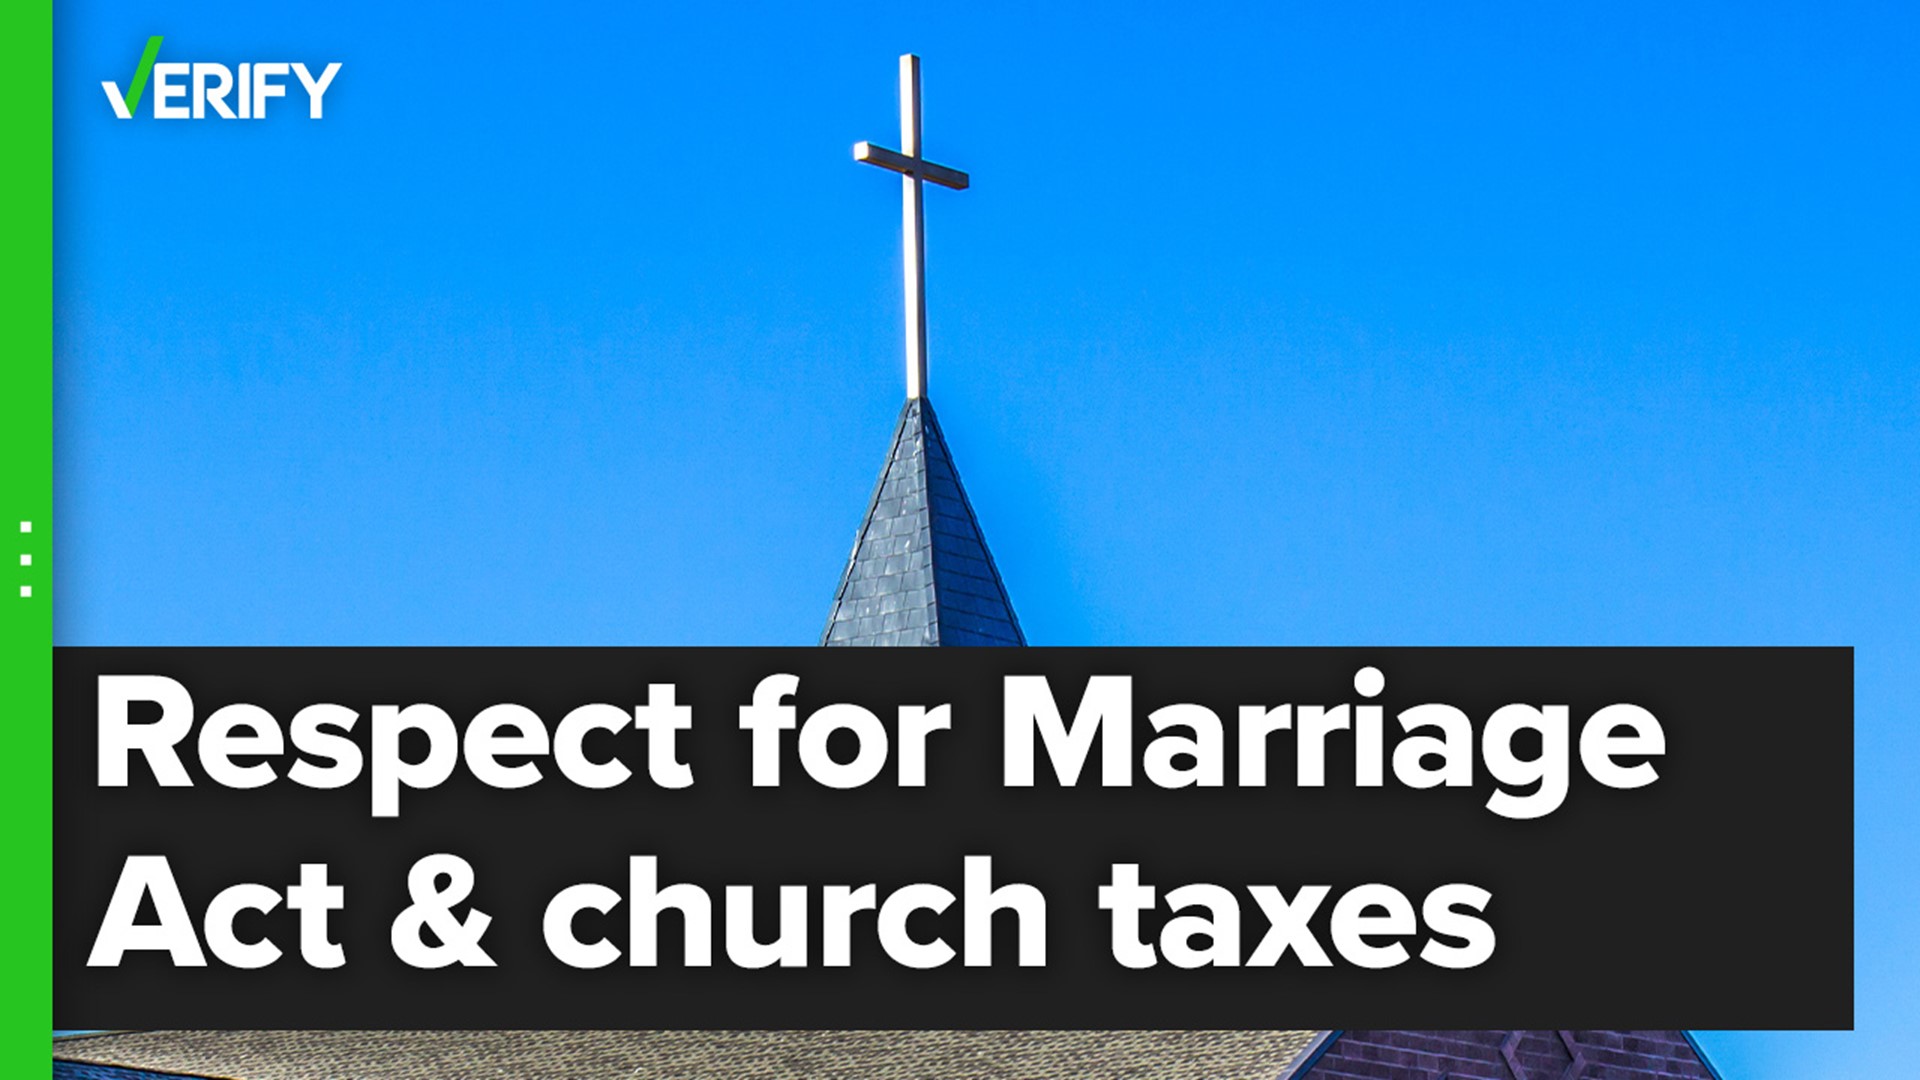 Churches that support same-sex marriage will not have their tax-exempt status revoked under the Respect for Marriage Act weareiowa